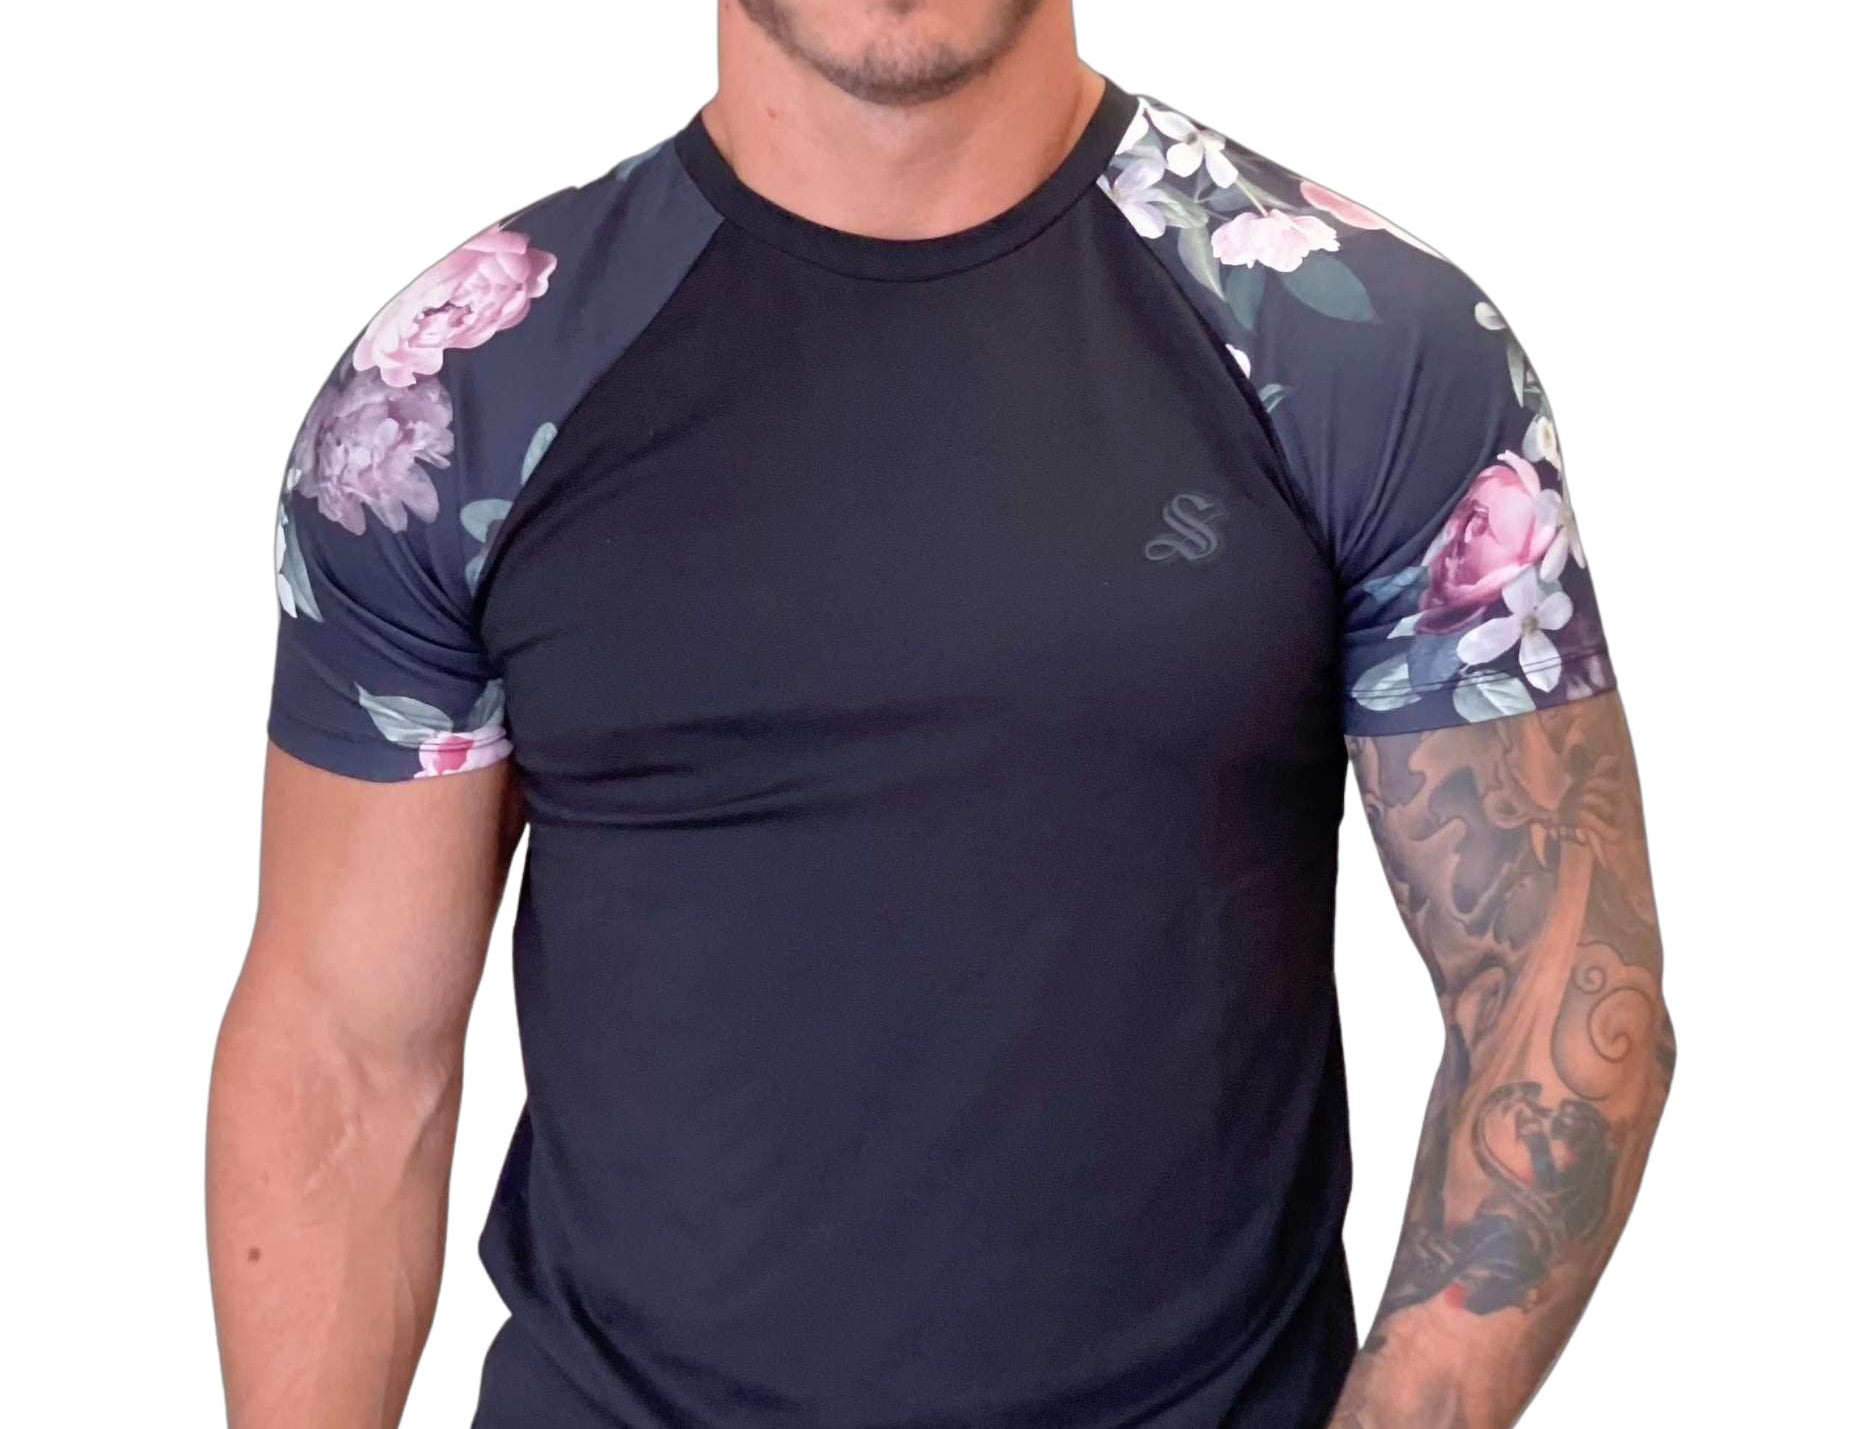 Naome - Black T-Shirt for Men (PRE-ORDER DISPATCH DATE 1 JULY 2022) - Sarman Fashion - Wholesale Clothing Fashion Brand for Men from Canada